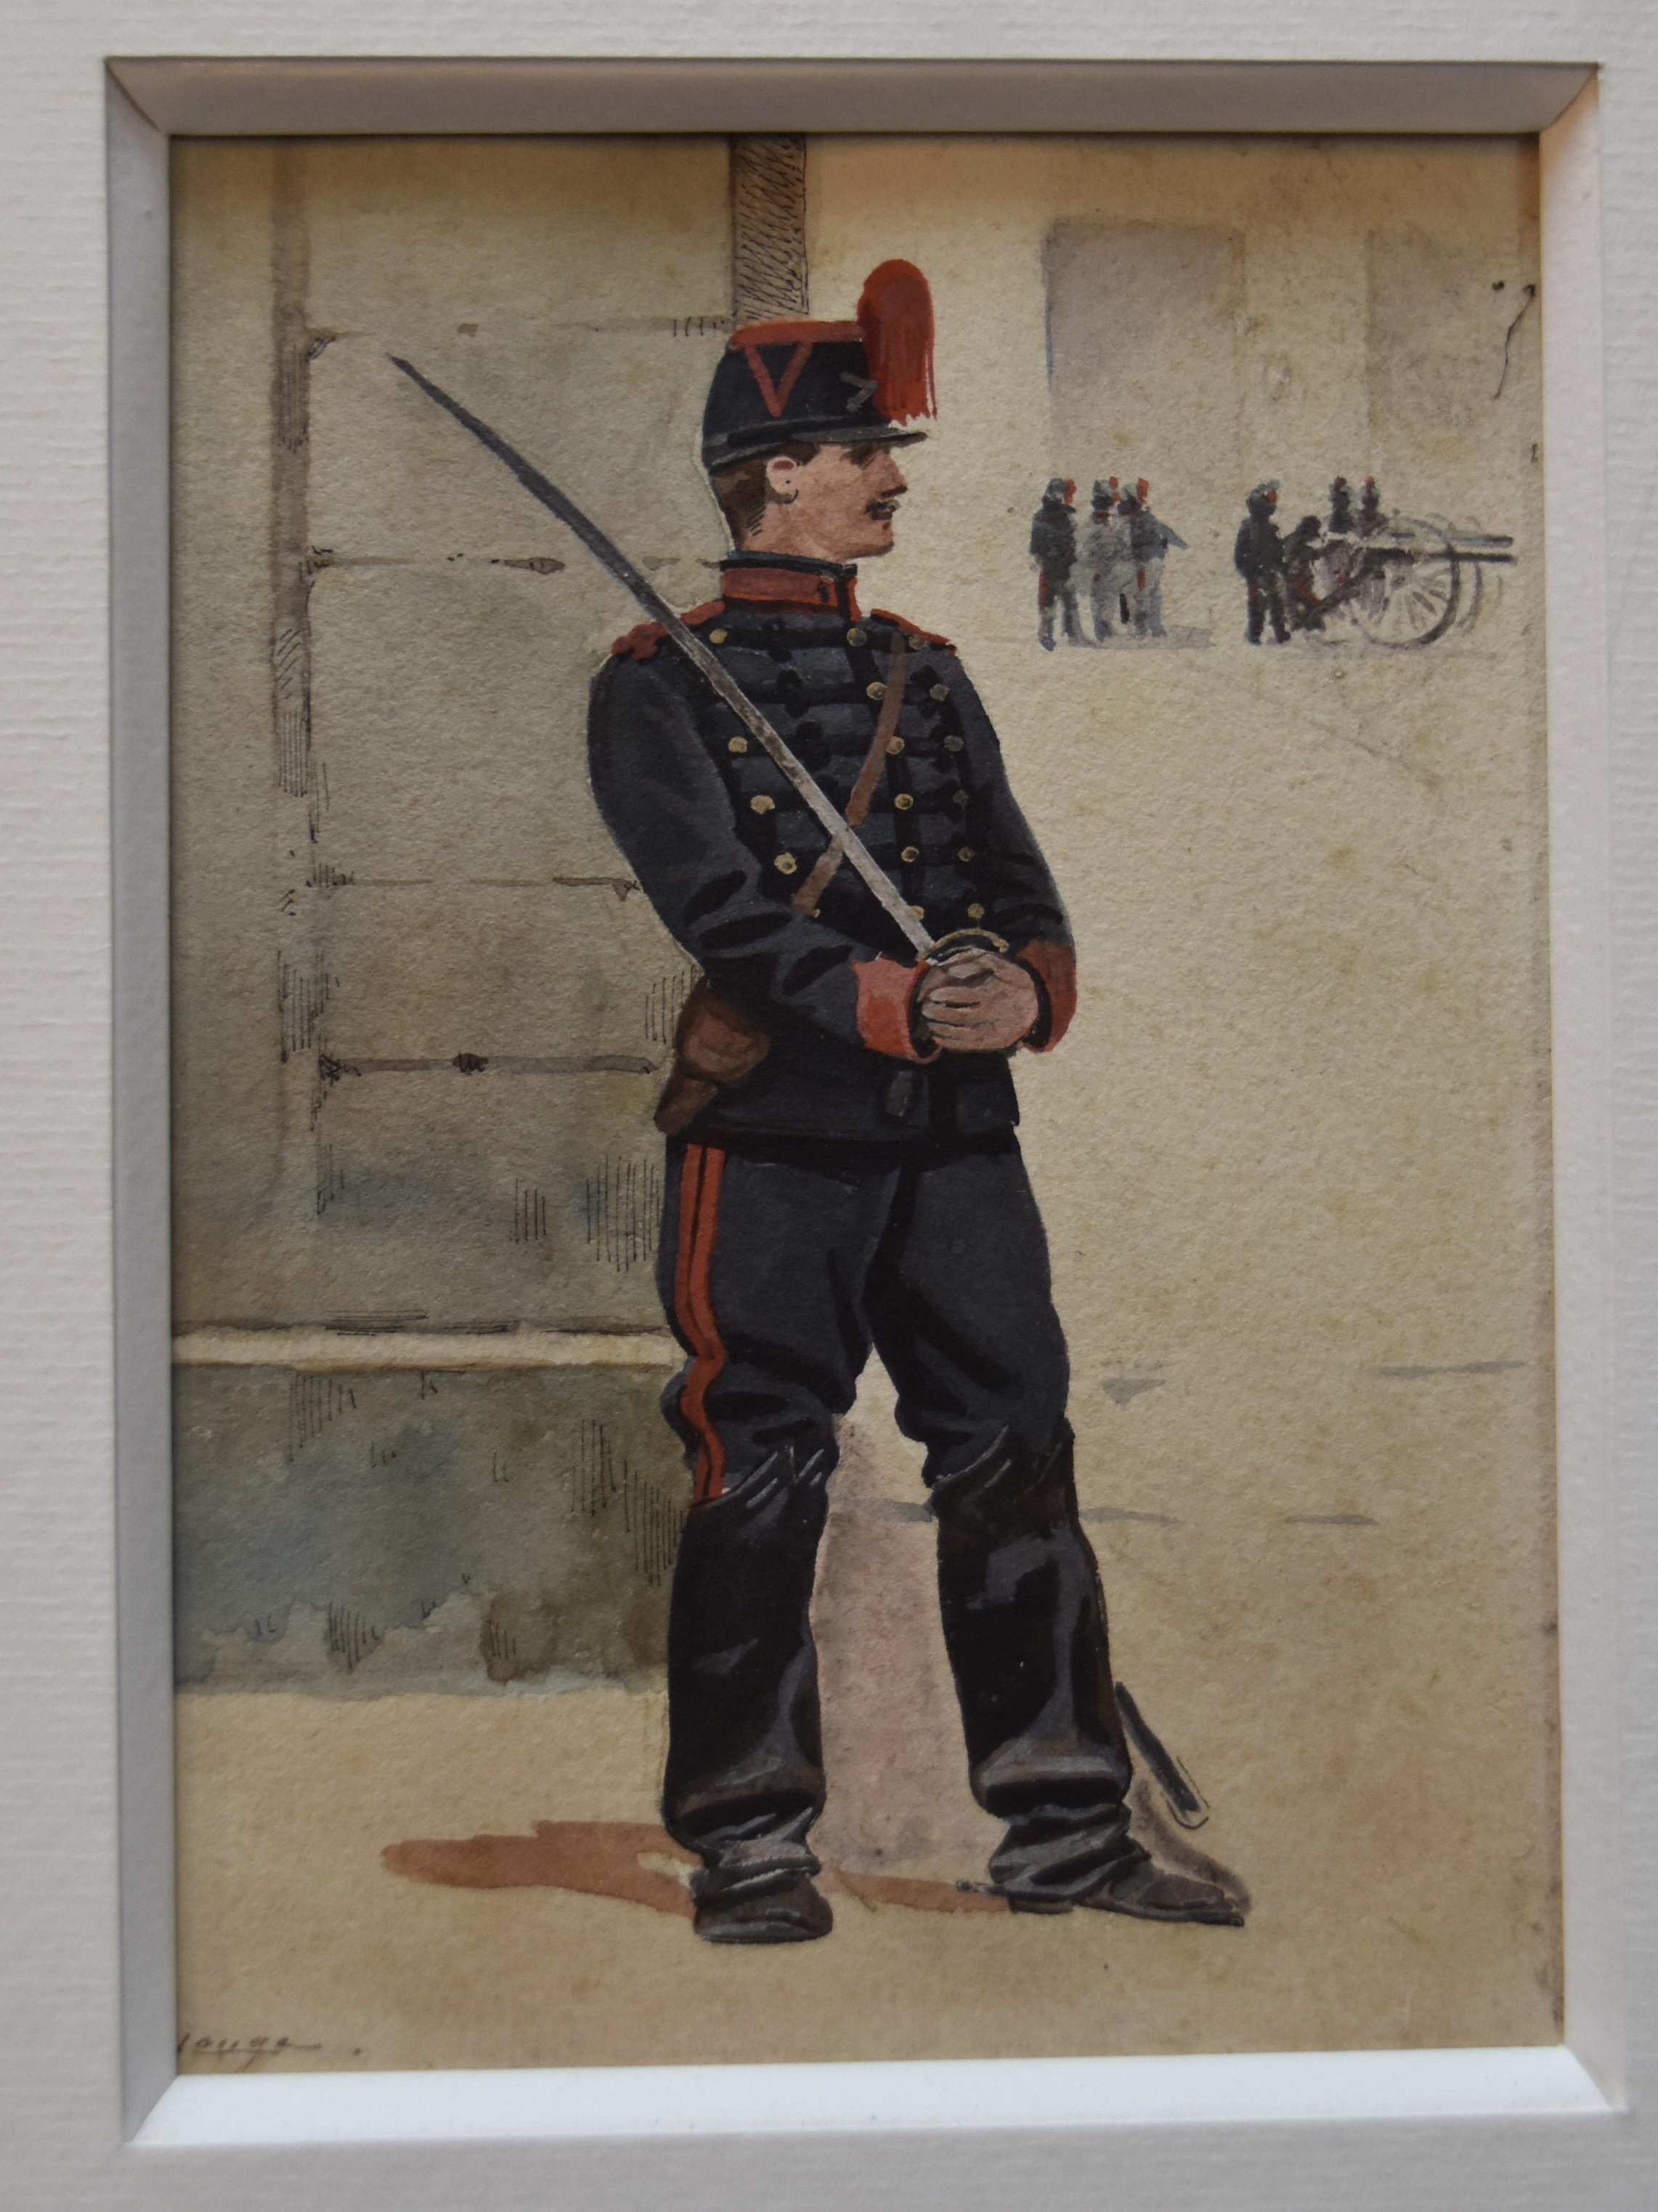 Jules Monge (1855-1934)
French soldiers, six different watercolors in a same mount
Each one signed (4 on lower right, 2 on lower left)
Each one 9.5 x 14 cm
Total size with the mount : 43 x 48 cm
It's a modern mount without frame
In good condition,